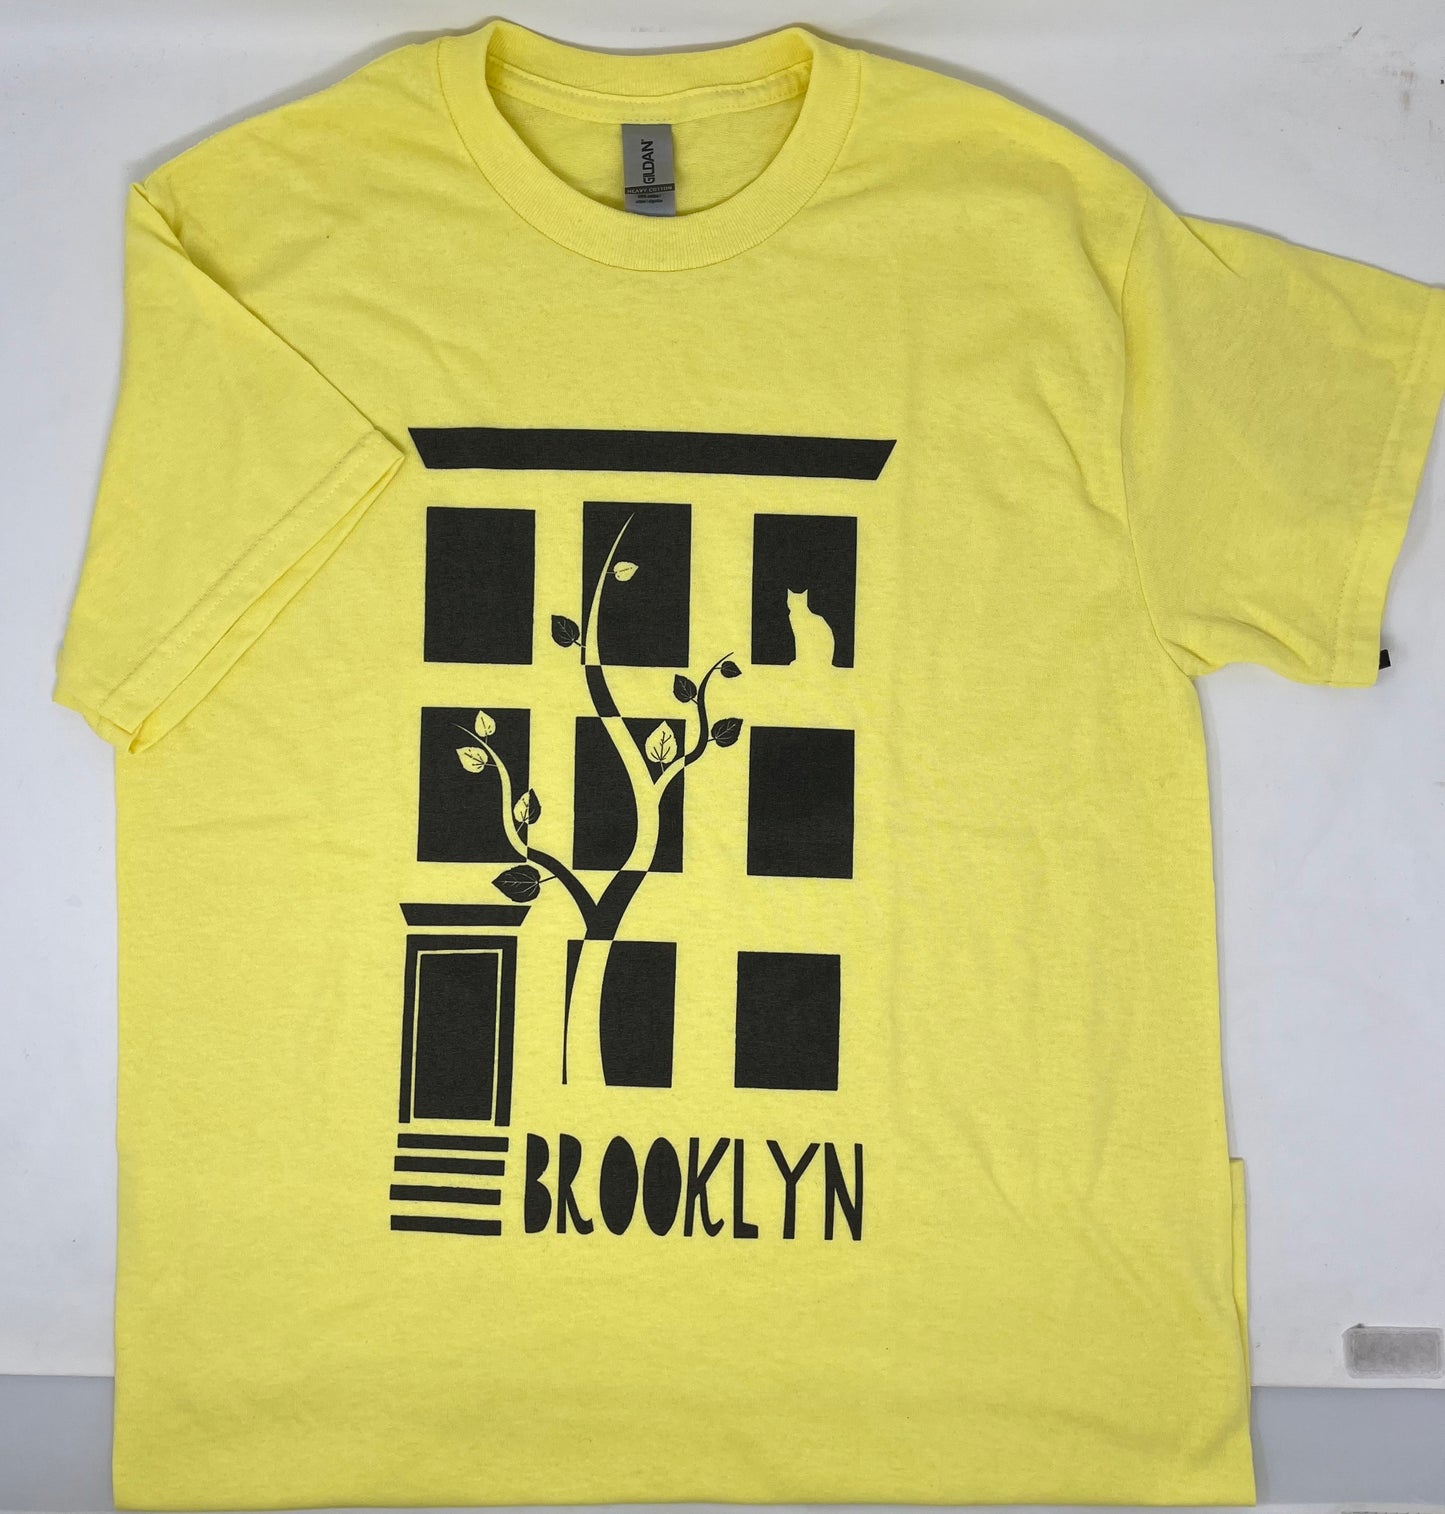 Brownstone Adult T Yellow Size XL